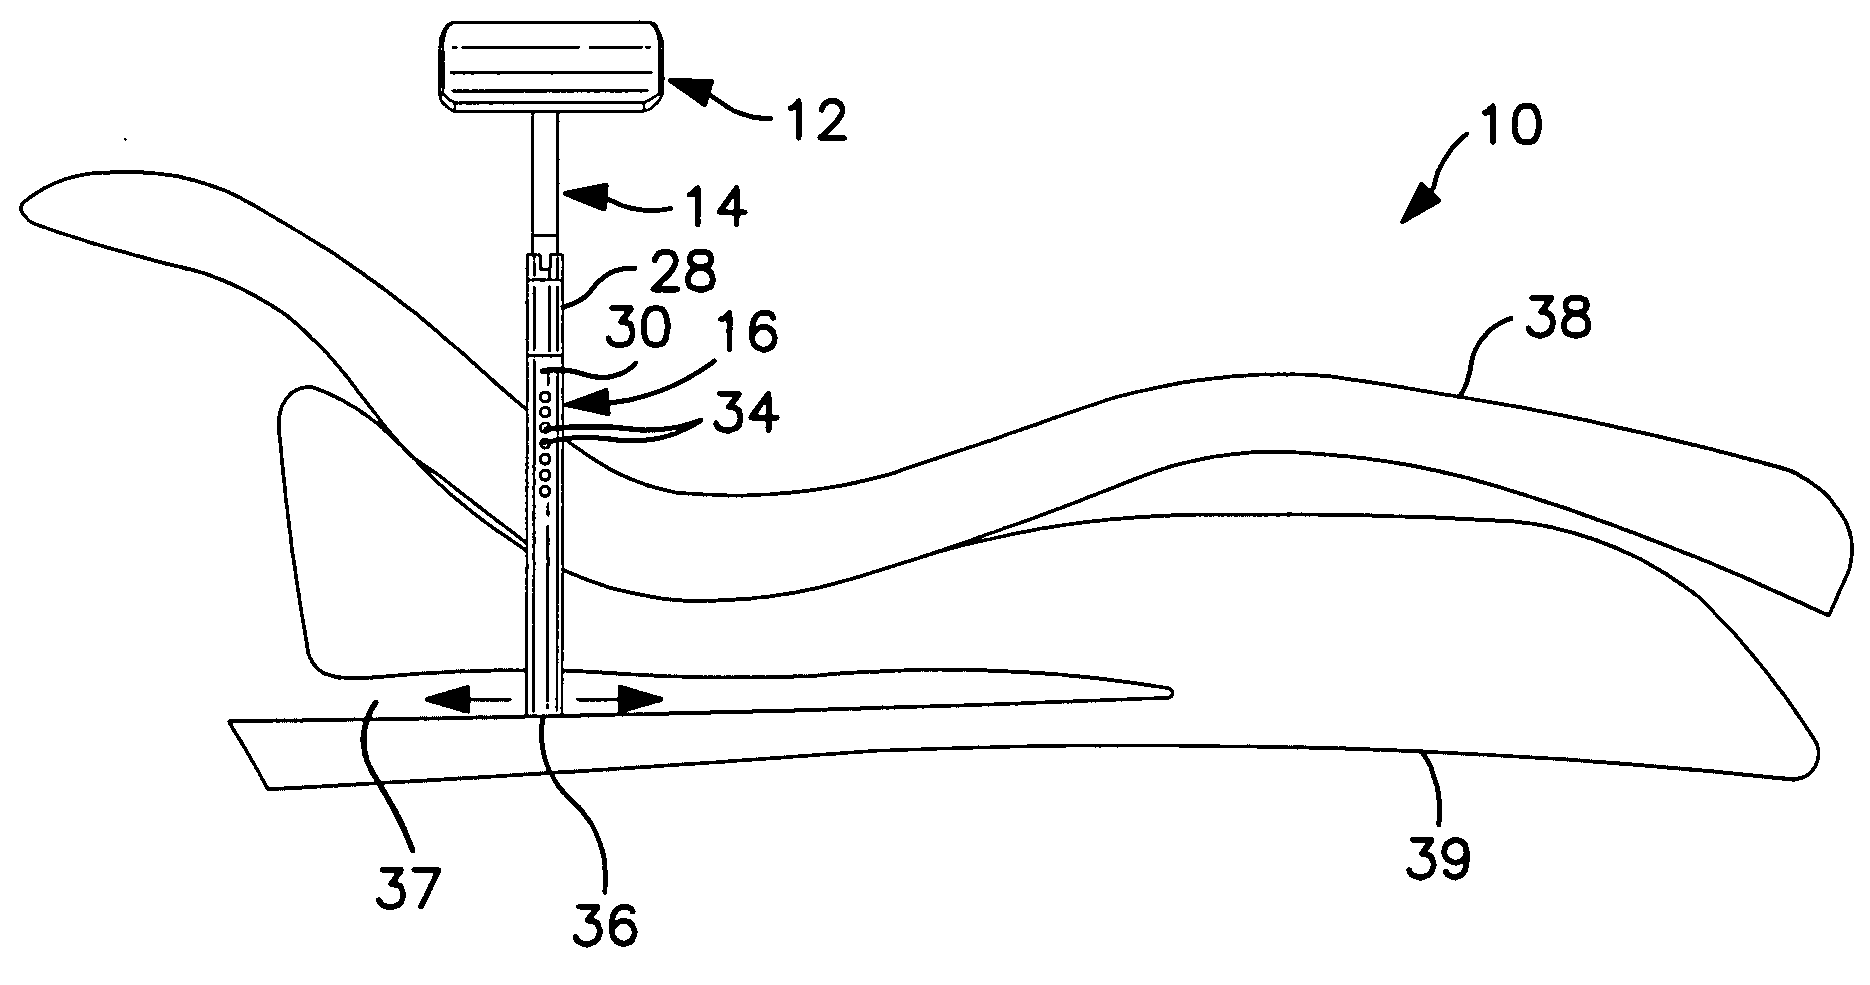 Anterior support device